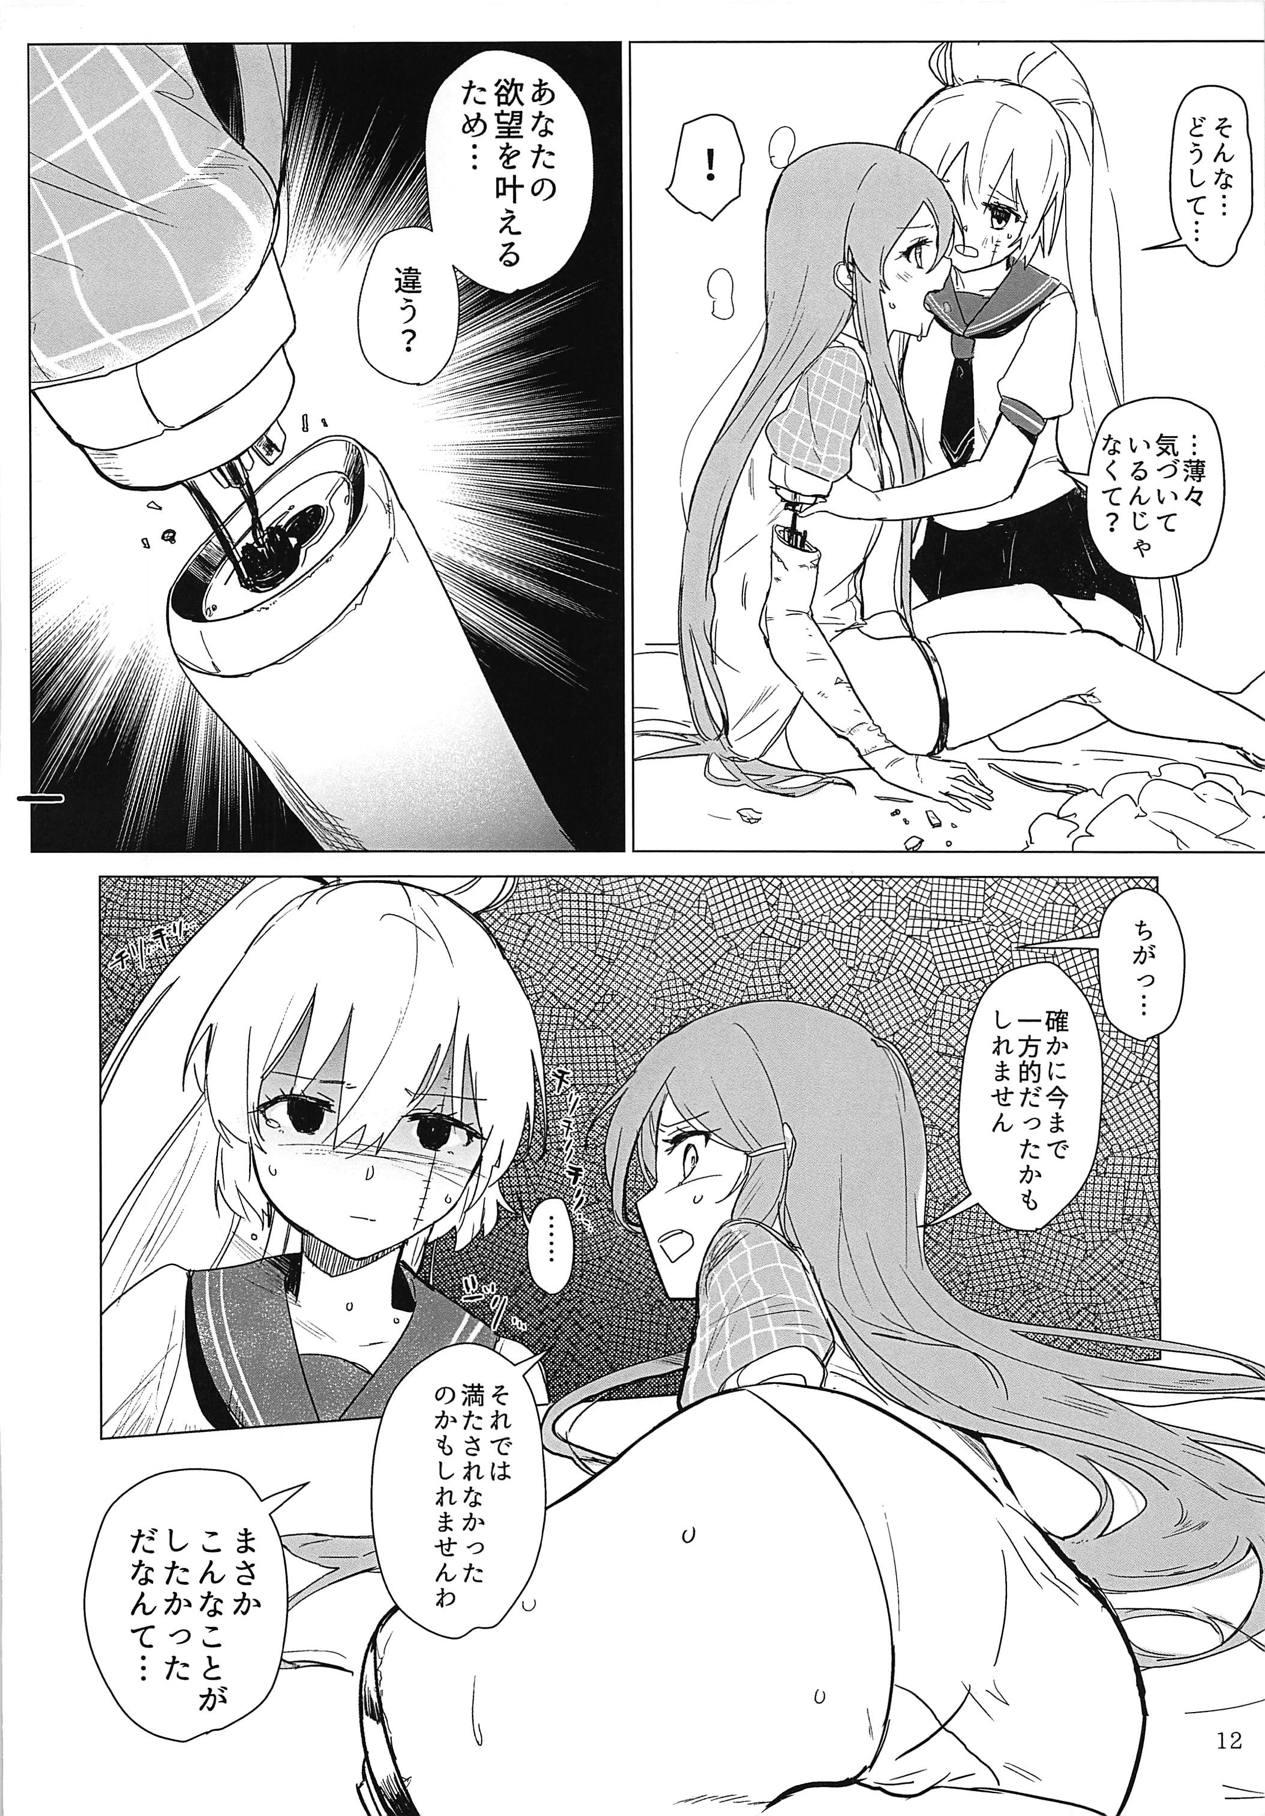 Cutie Sweet Poison in Noble Blend - Akuma no riddle Moms - Page 11